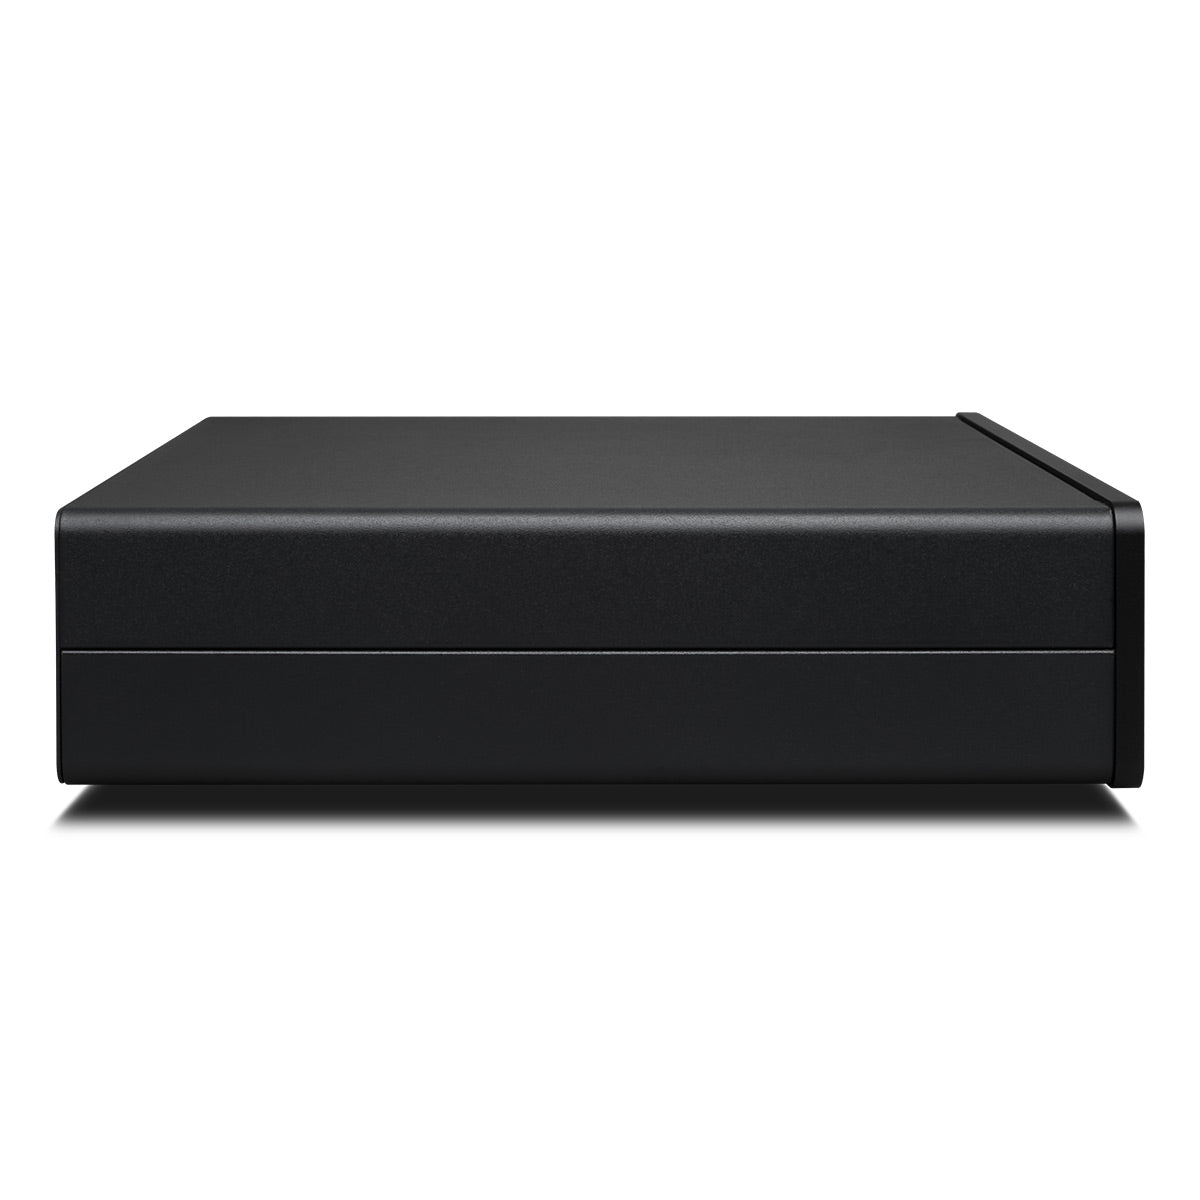 Cambridge Audio MXN10 Network Player with Bluetooth, Apple Airplay 2, Chromecast, Built-In DAC, & Roon Ready (Limited Edition Black)